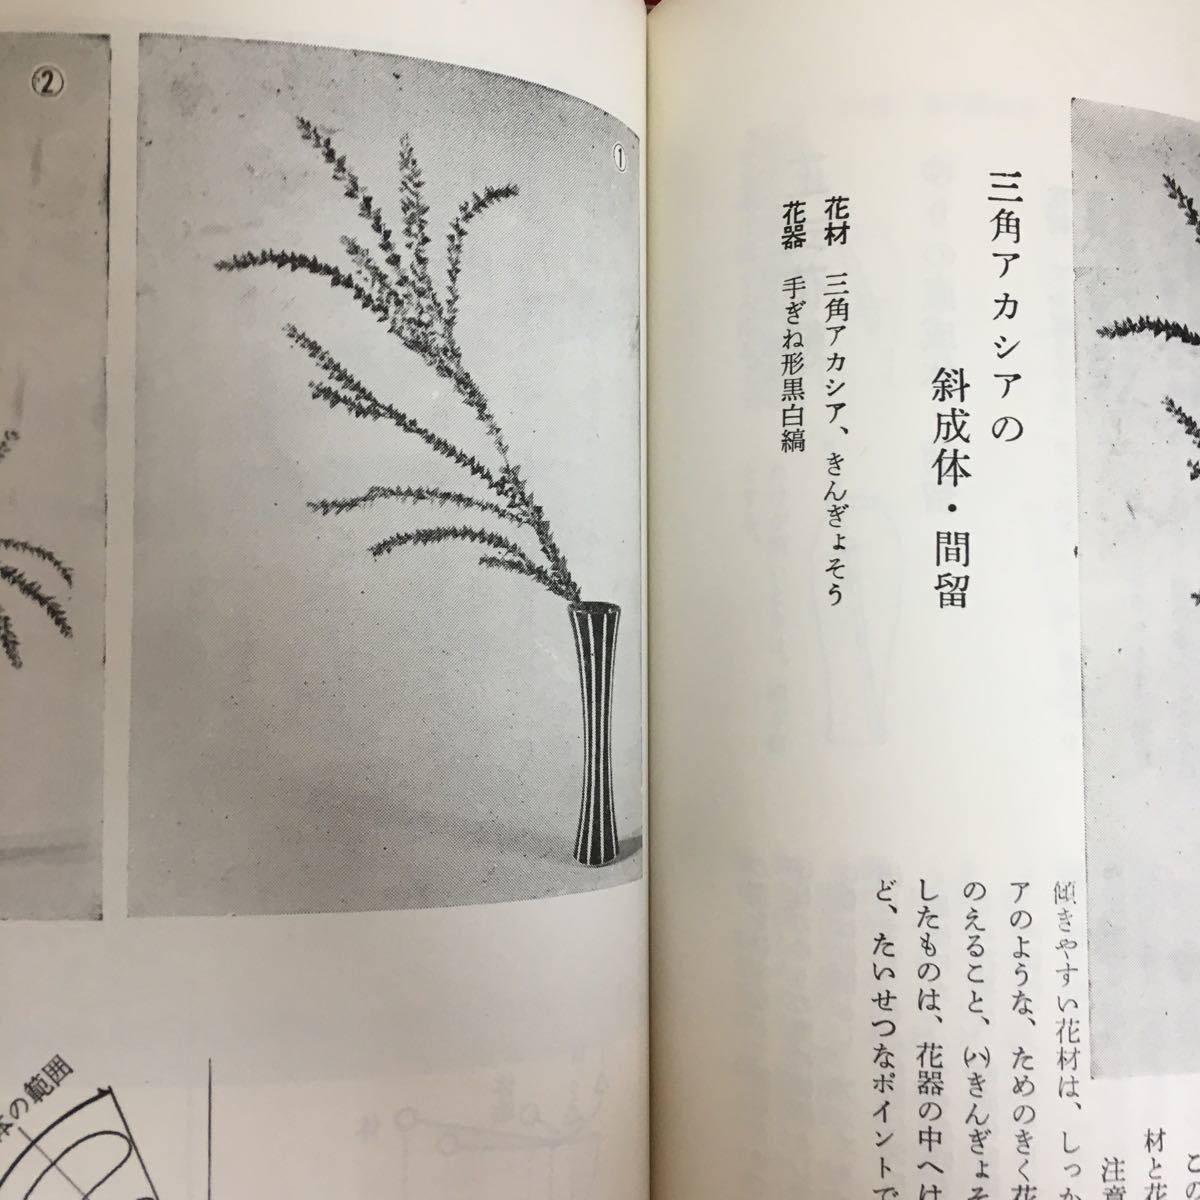 i-253*6/.... text book ... base . respondent for Showa era 47 year 8 month 1 day 48 version issue eyes next ... concerning natural flower . vase flower etc. 